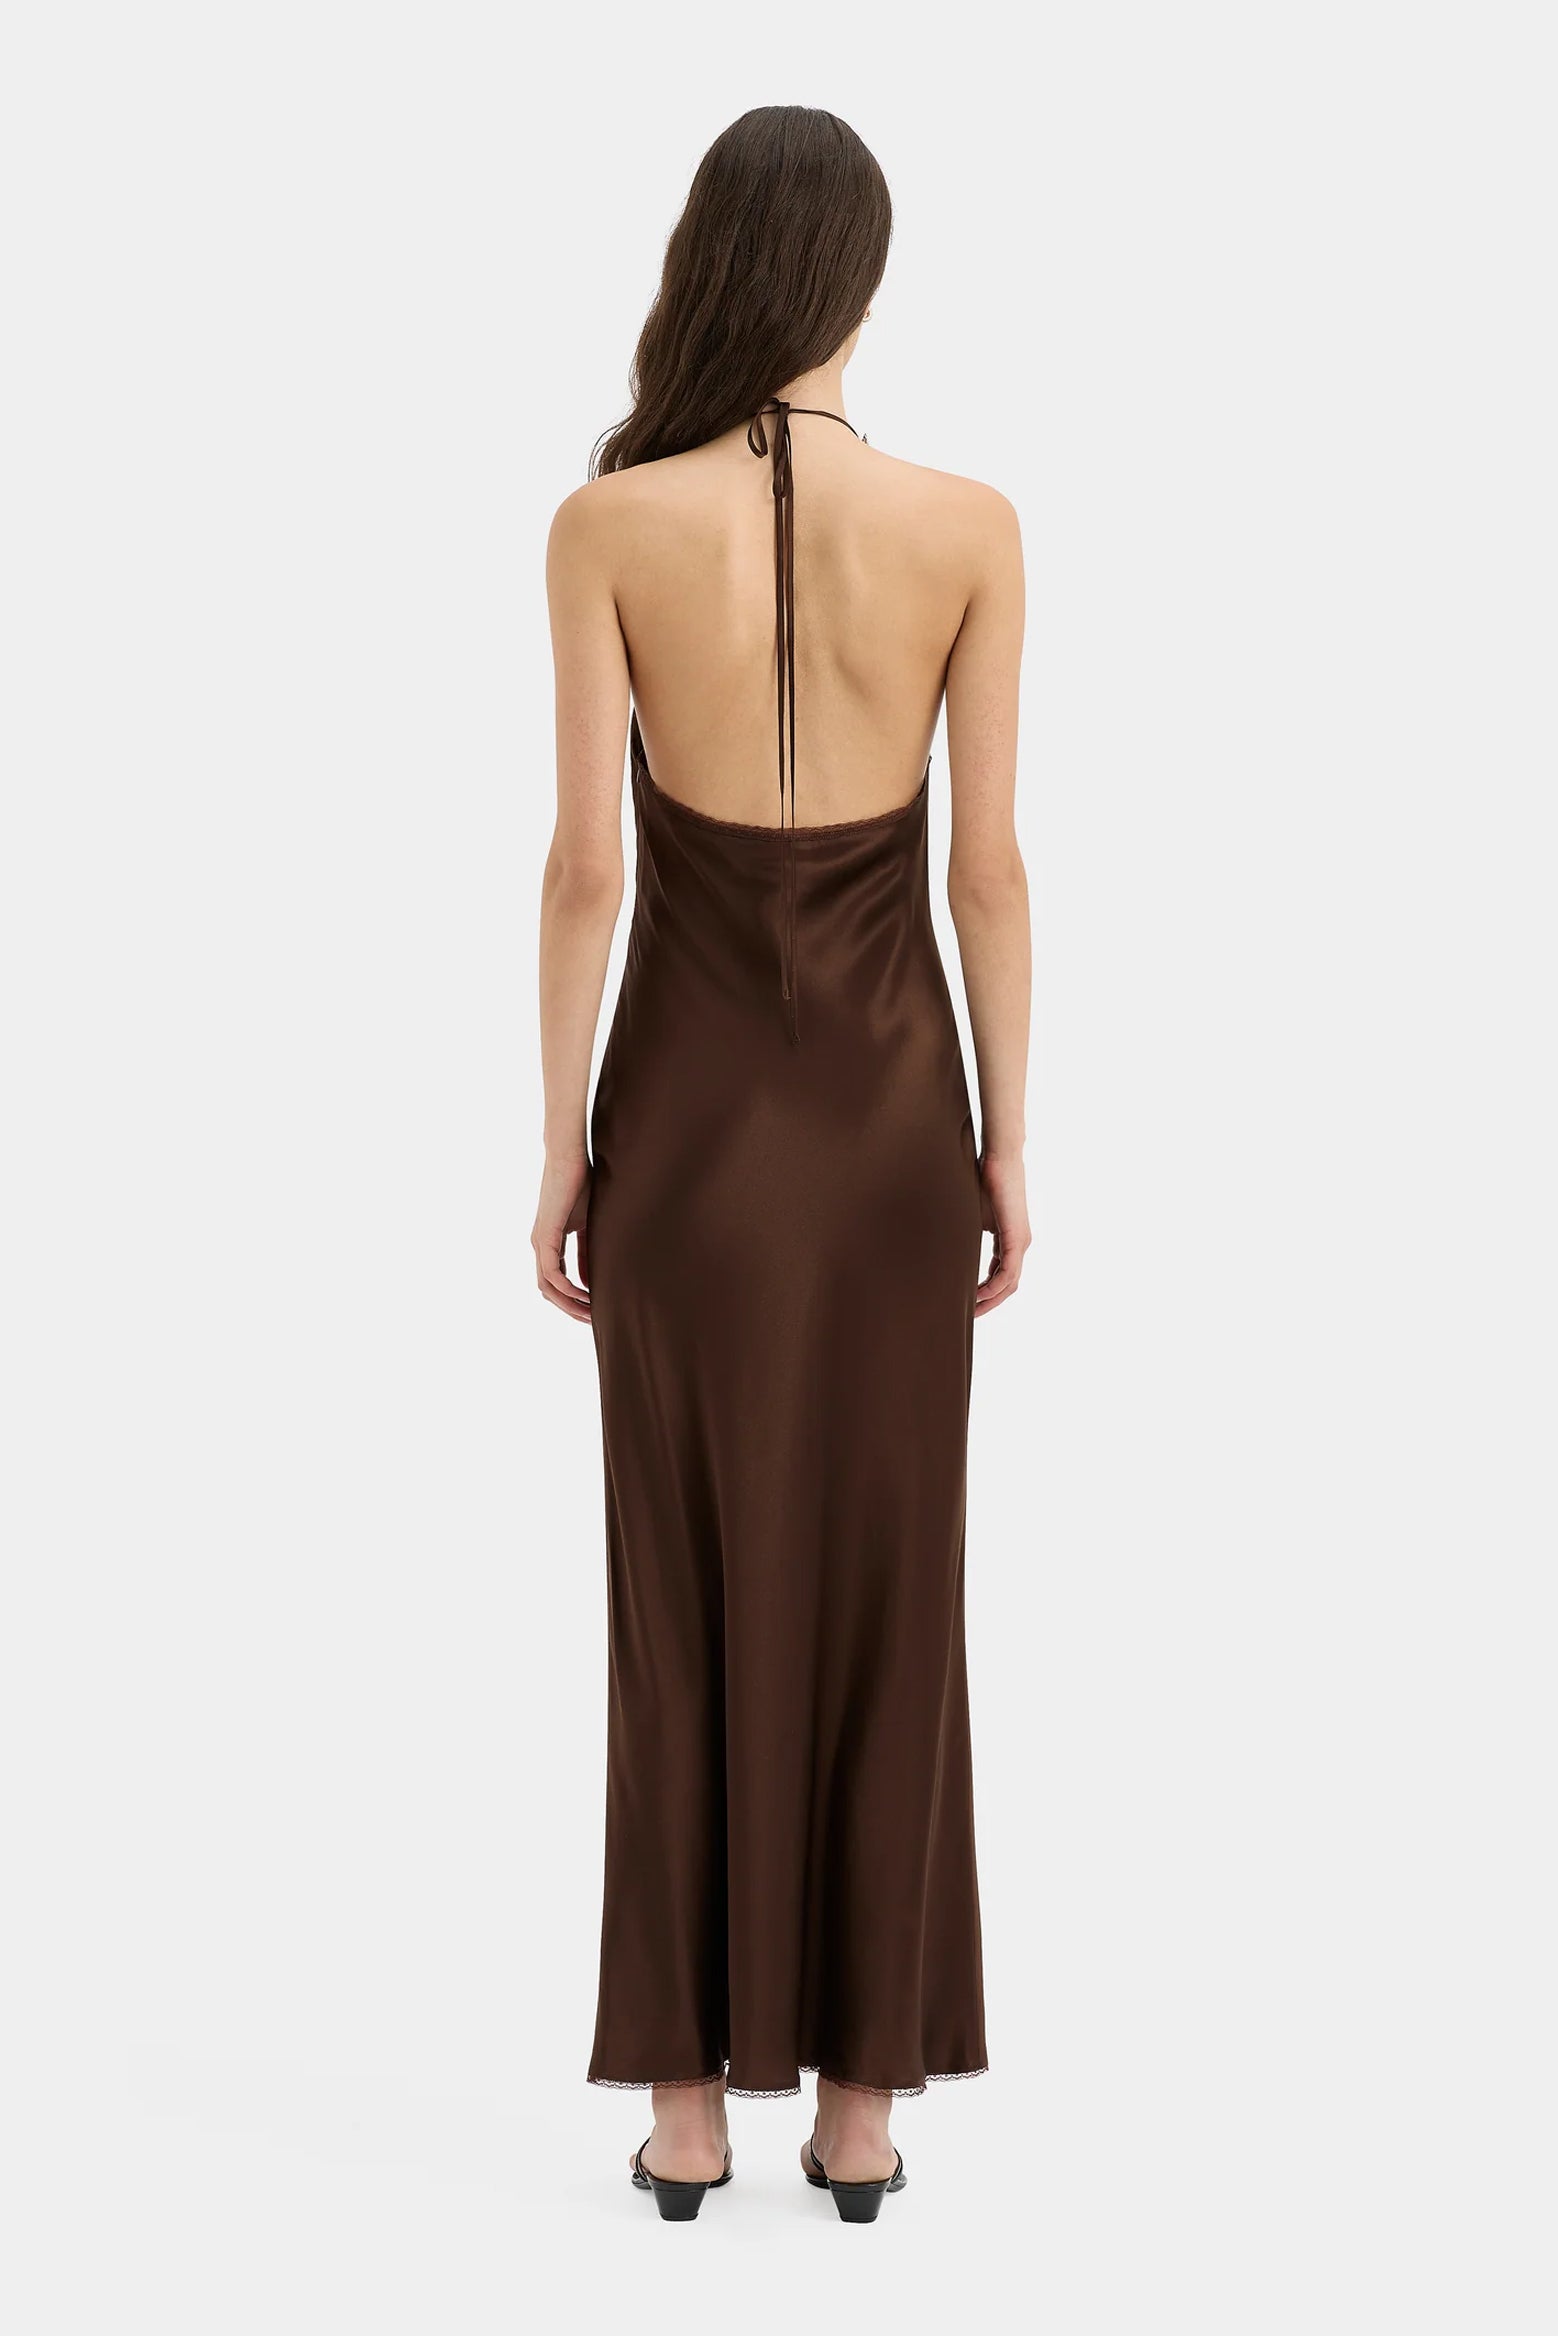 SIR Aries Halter Gown in Chocolate available at The New Trend Australia.